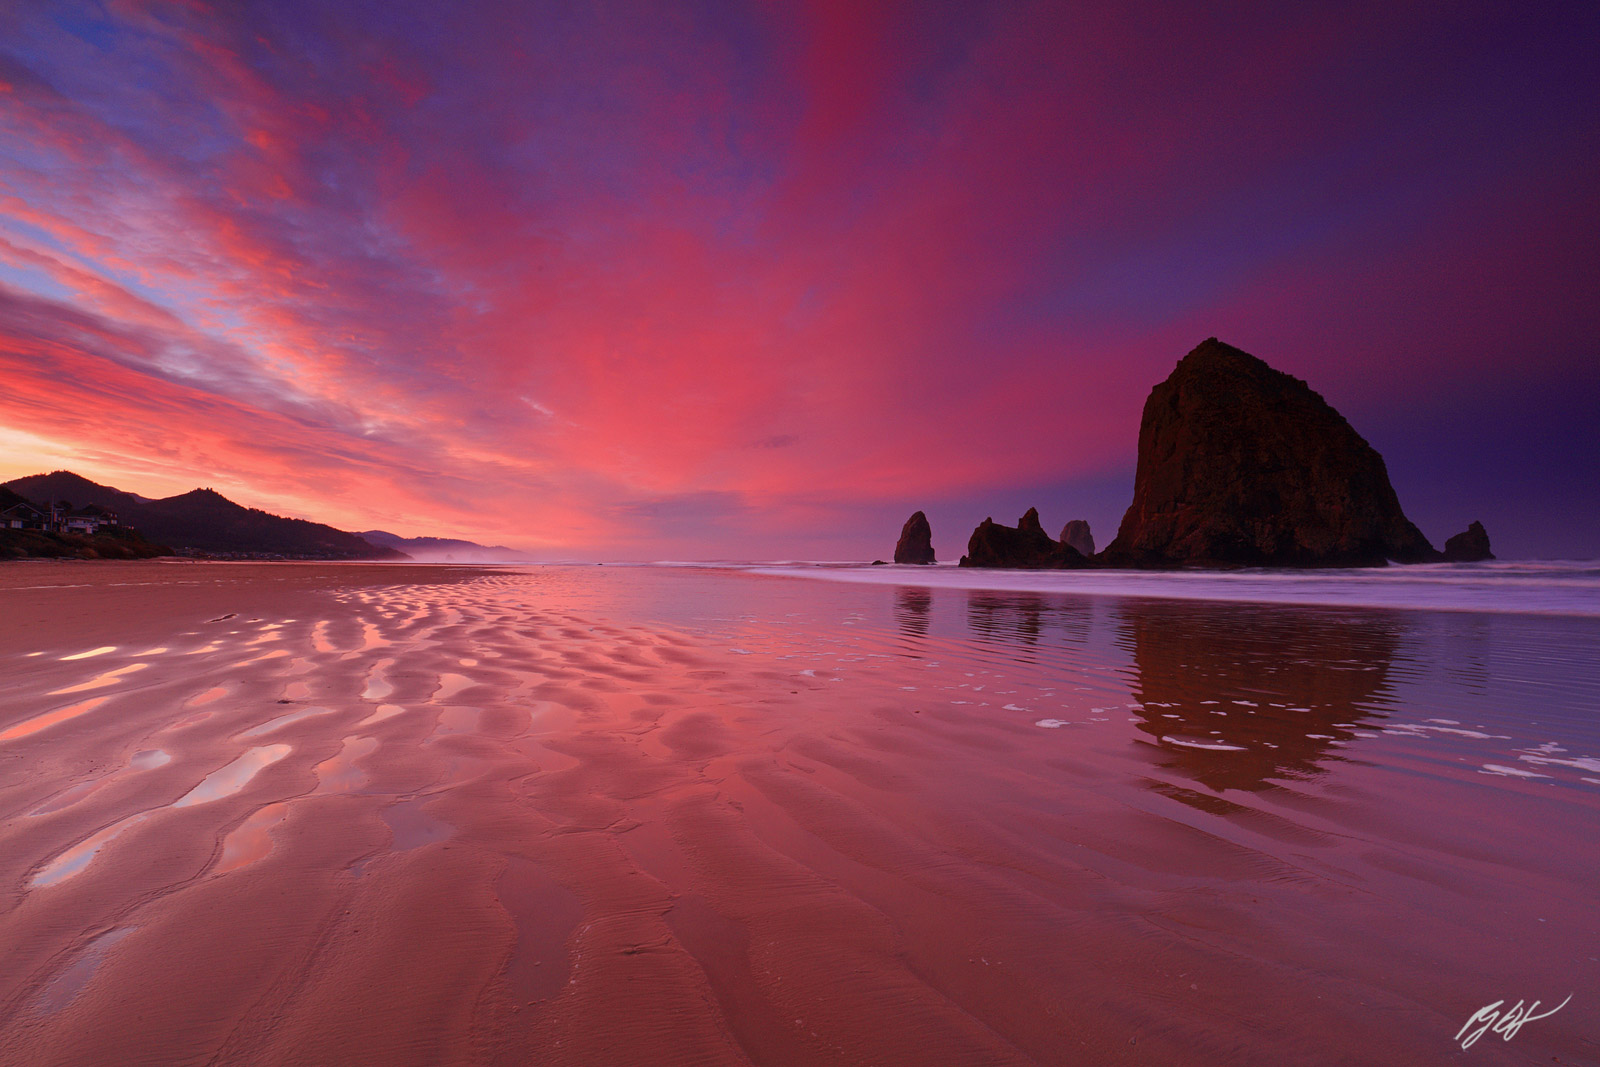 Sunrise Reflections with Haystack Rock from Cannon Beach on the Oregon Coast